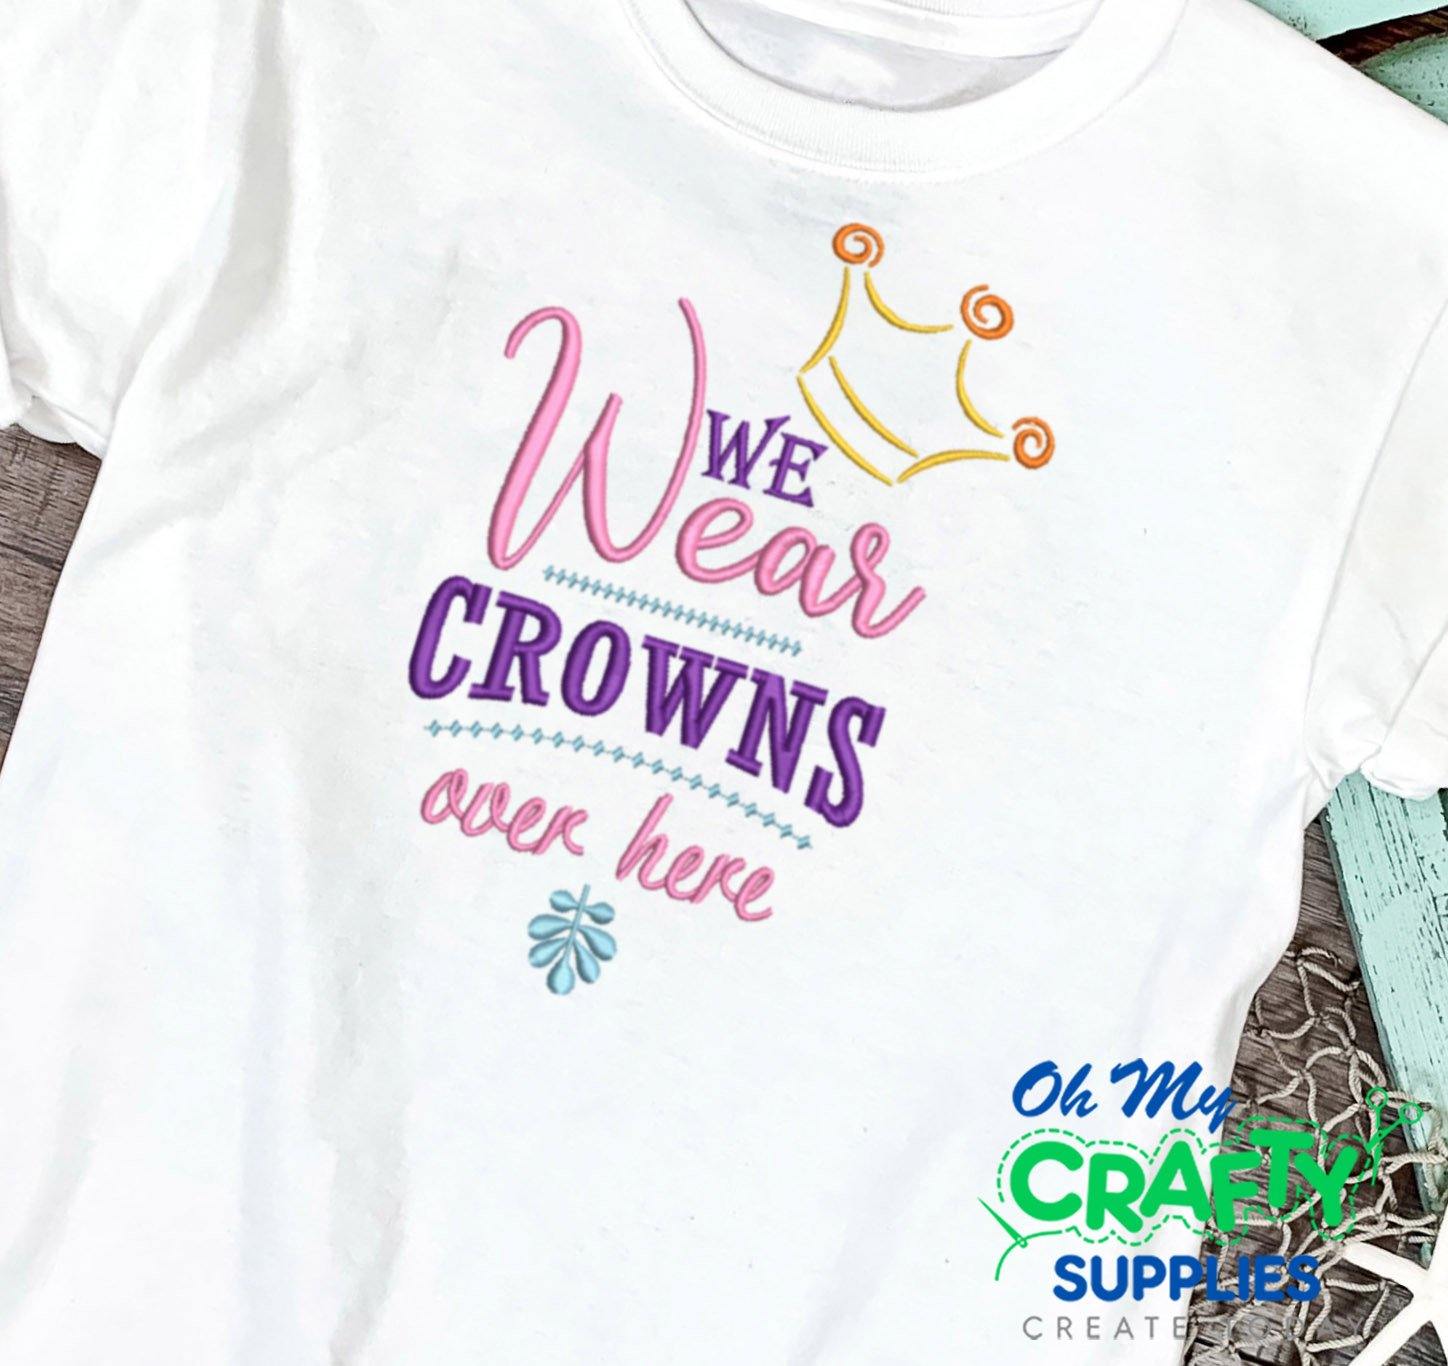 We Wear Crowns Embroidery Design - Oh My Crafty Supplies Inc.